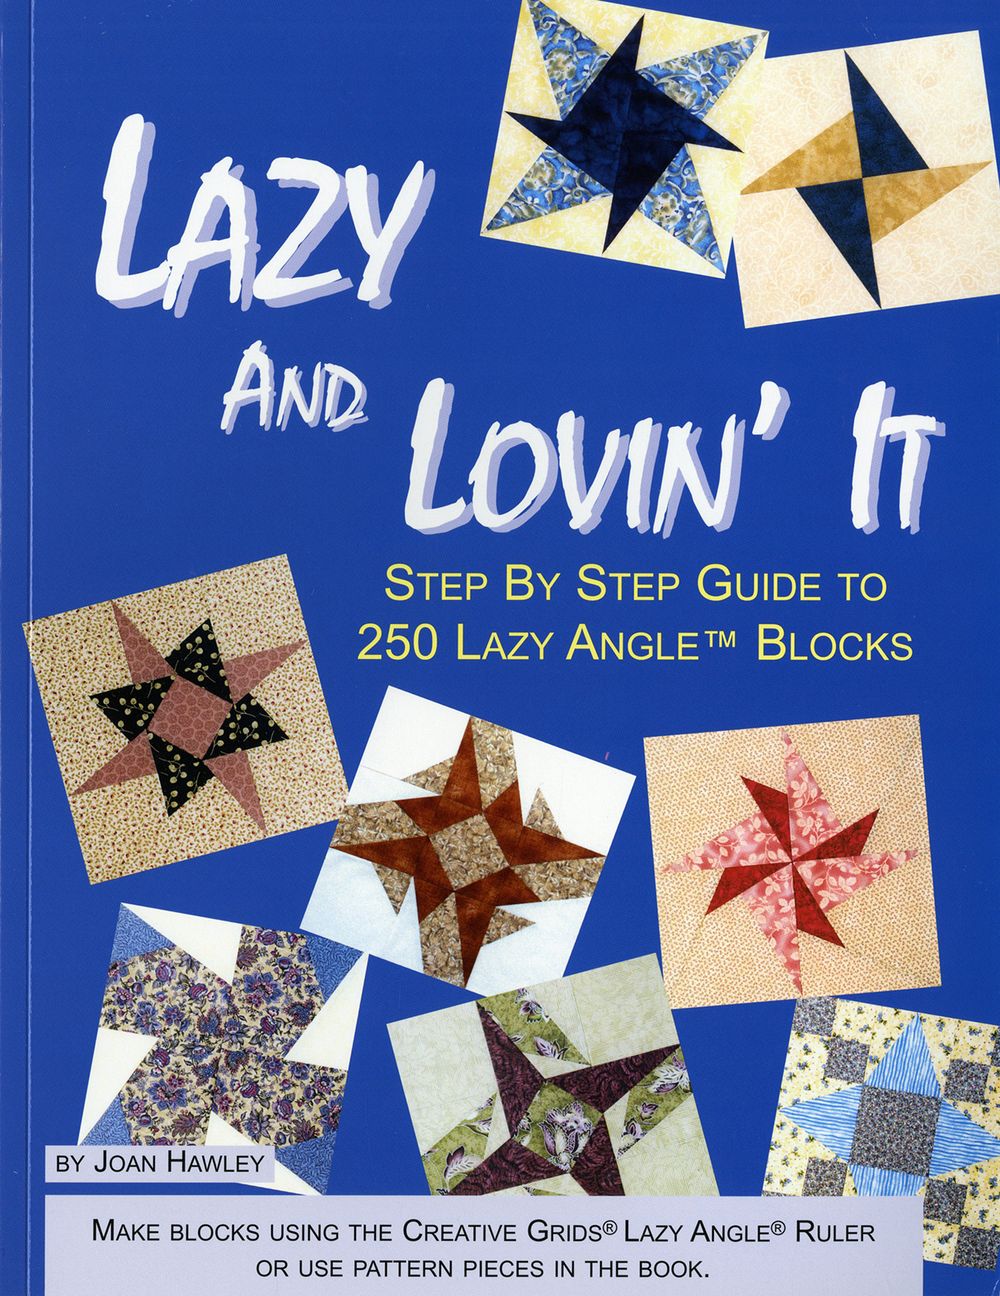 Lazy And Lovin' It Quilt Book by Joan Hawley of Lazy Girl Designs